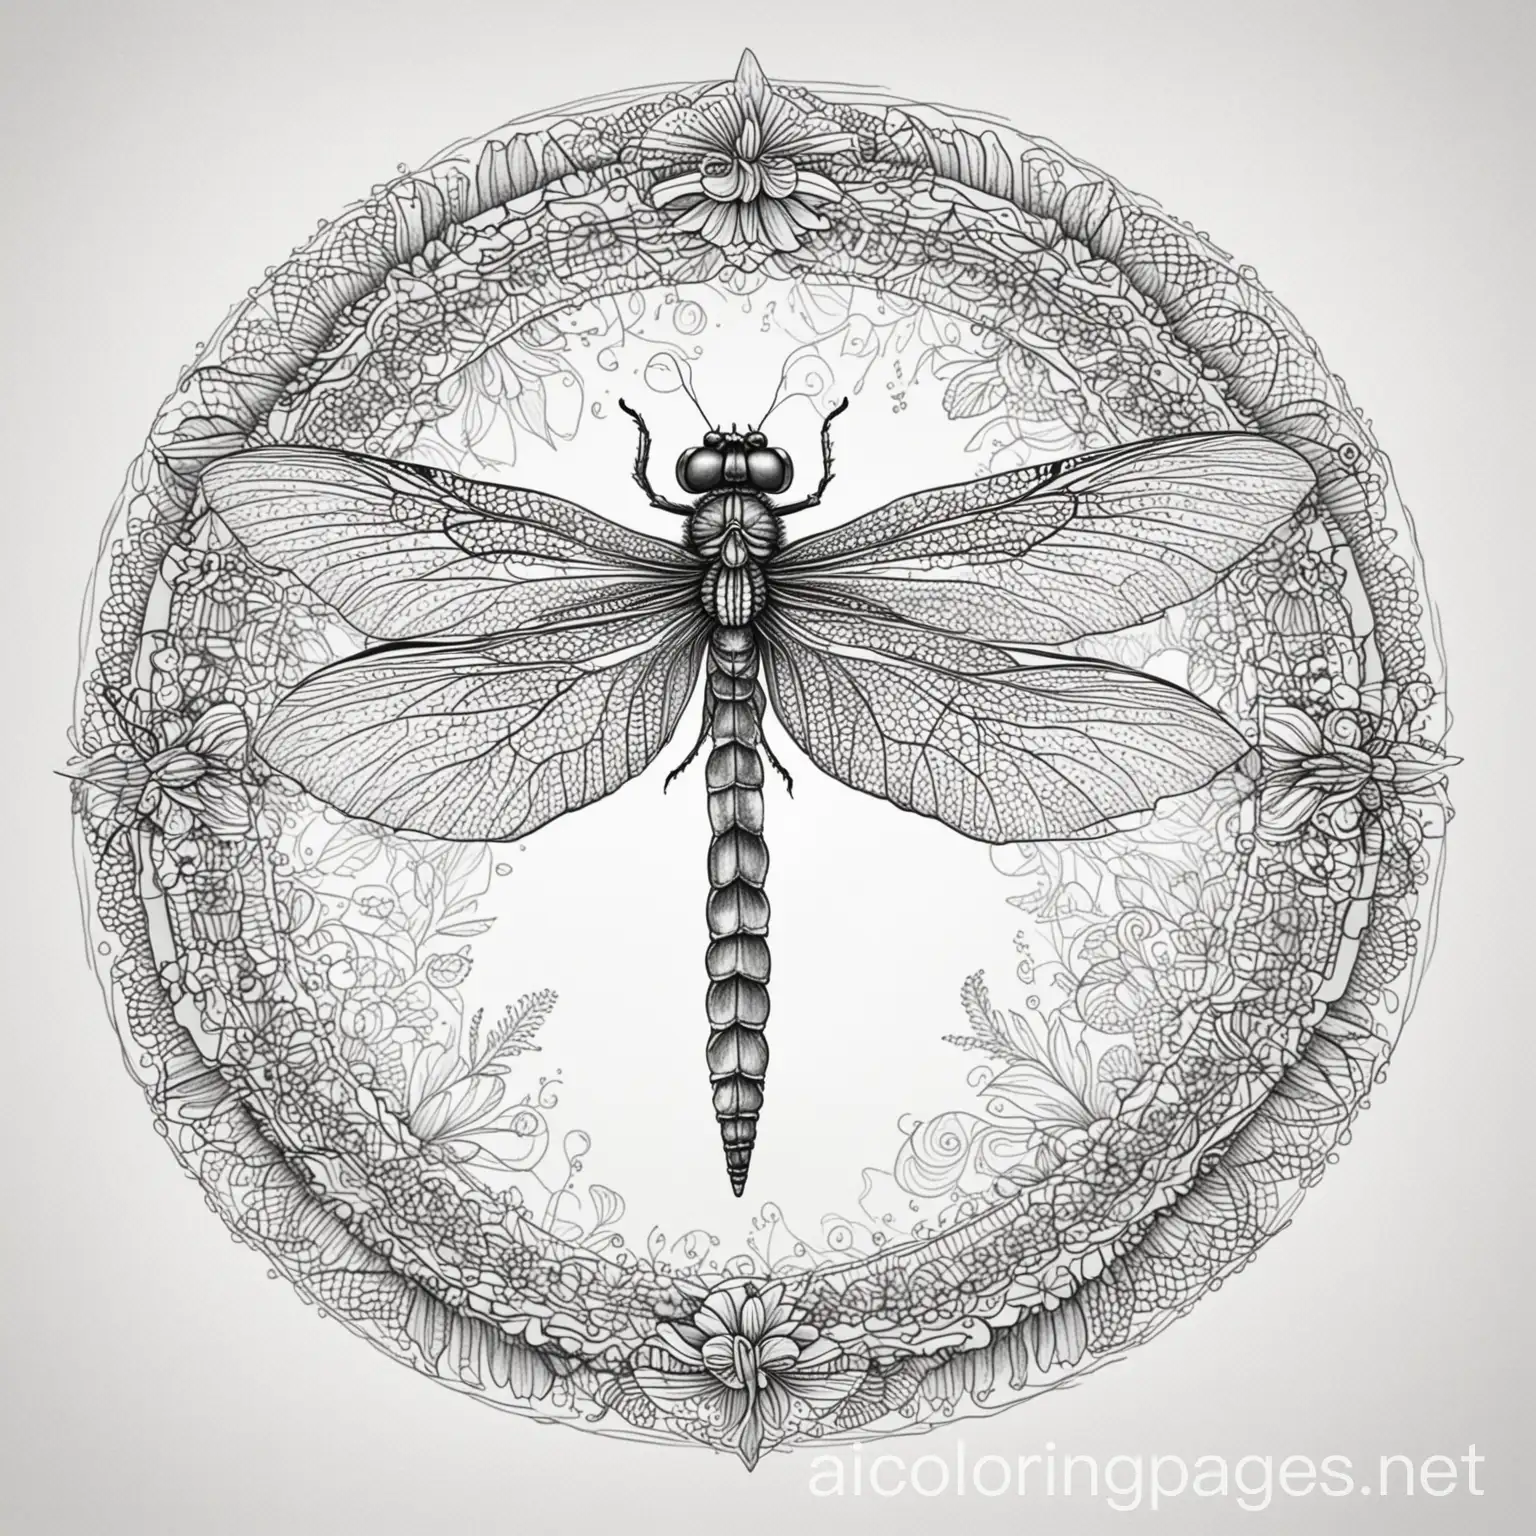 Dragonfly mandala, Coloring Page, black and white, line art, white background, Simplicity, Ample White Space. The background of the coloring page is plain white to make it easy for young children to color within the lines. The outlines of all the subjects are easy to distinguish, making it simple for kids to color without too much difficulty